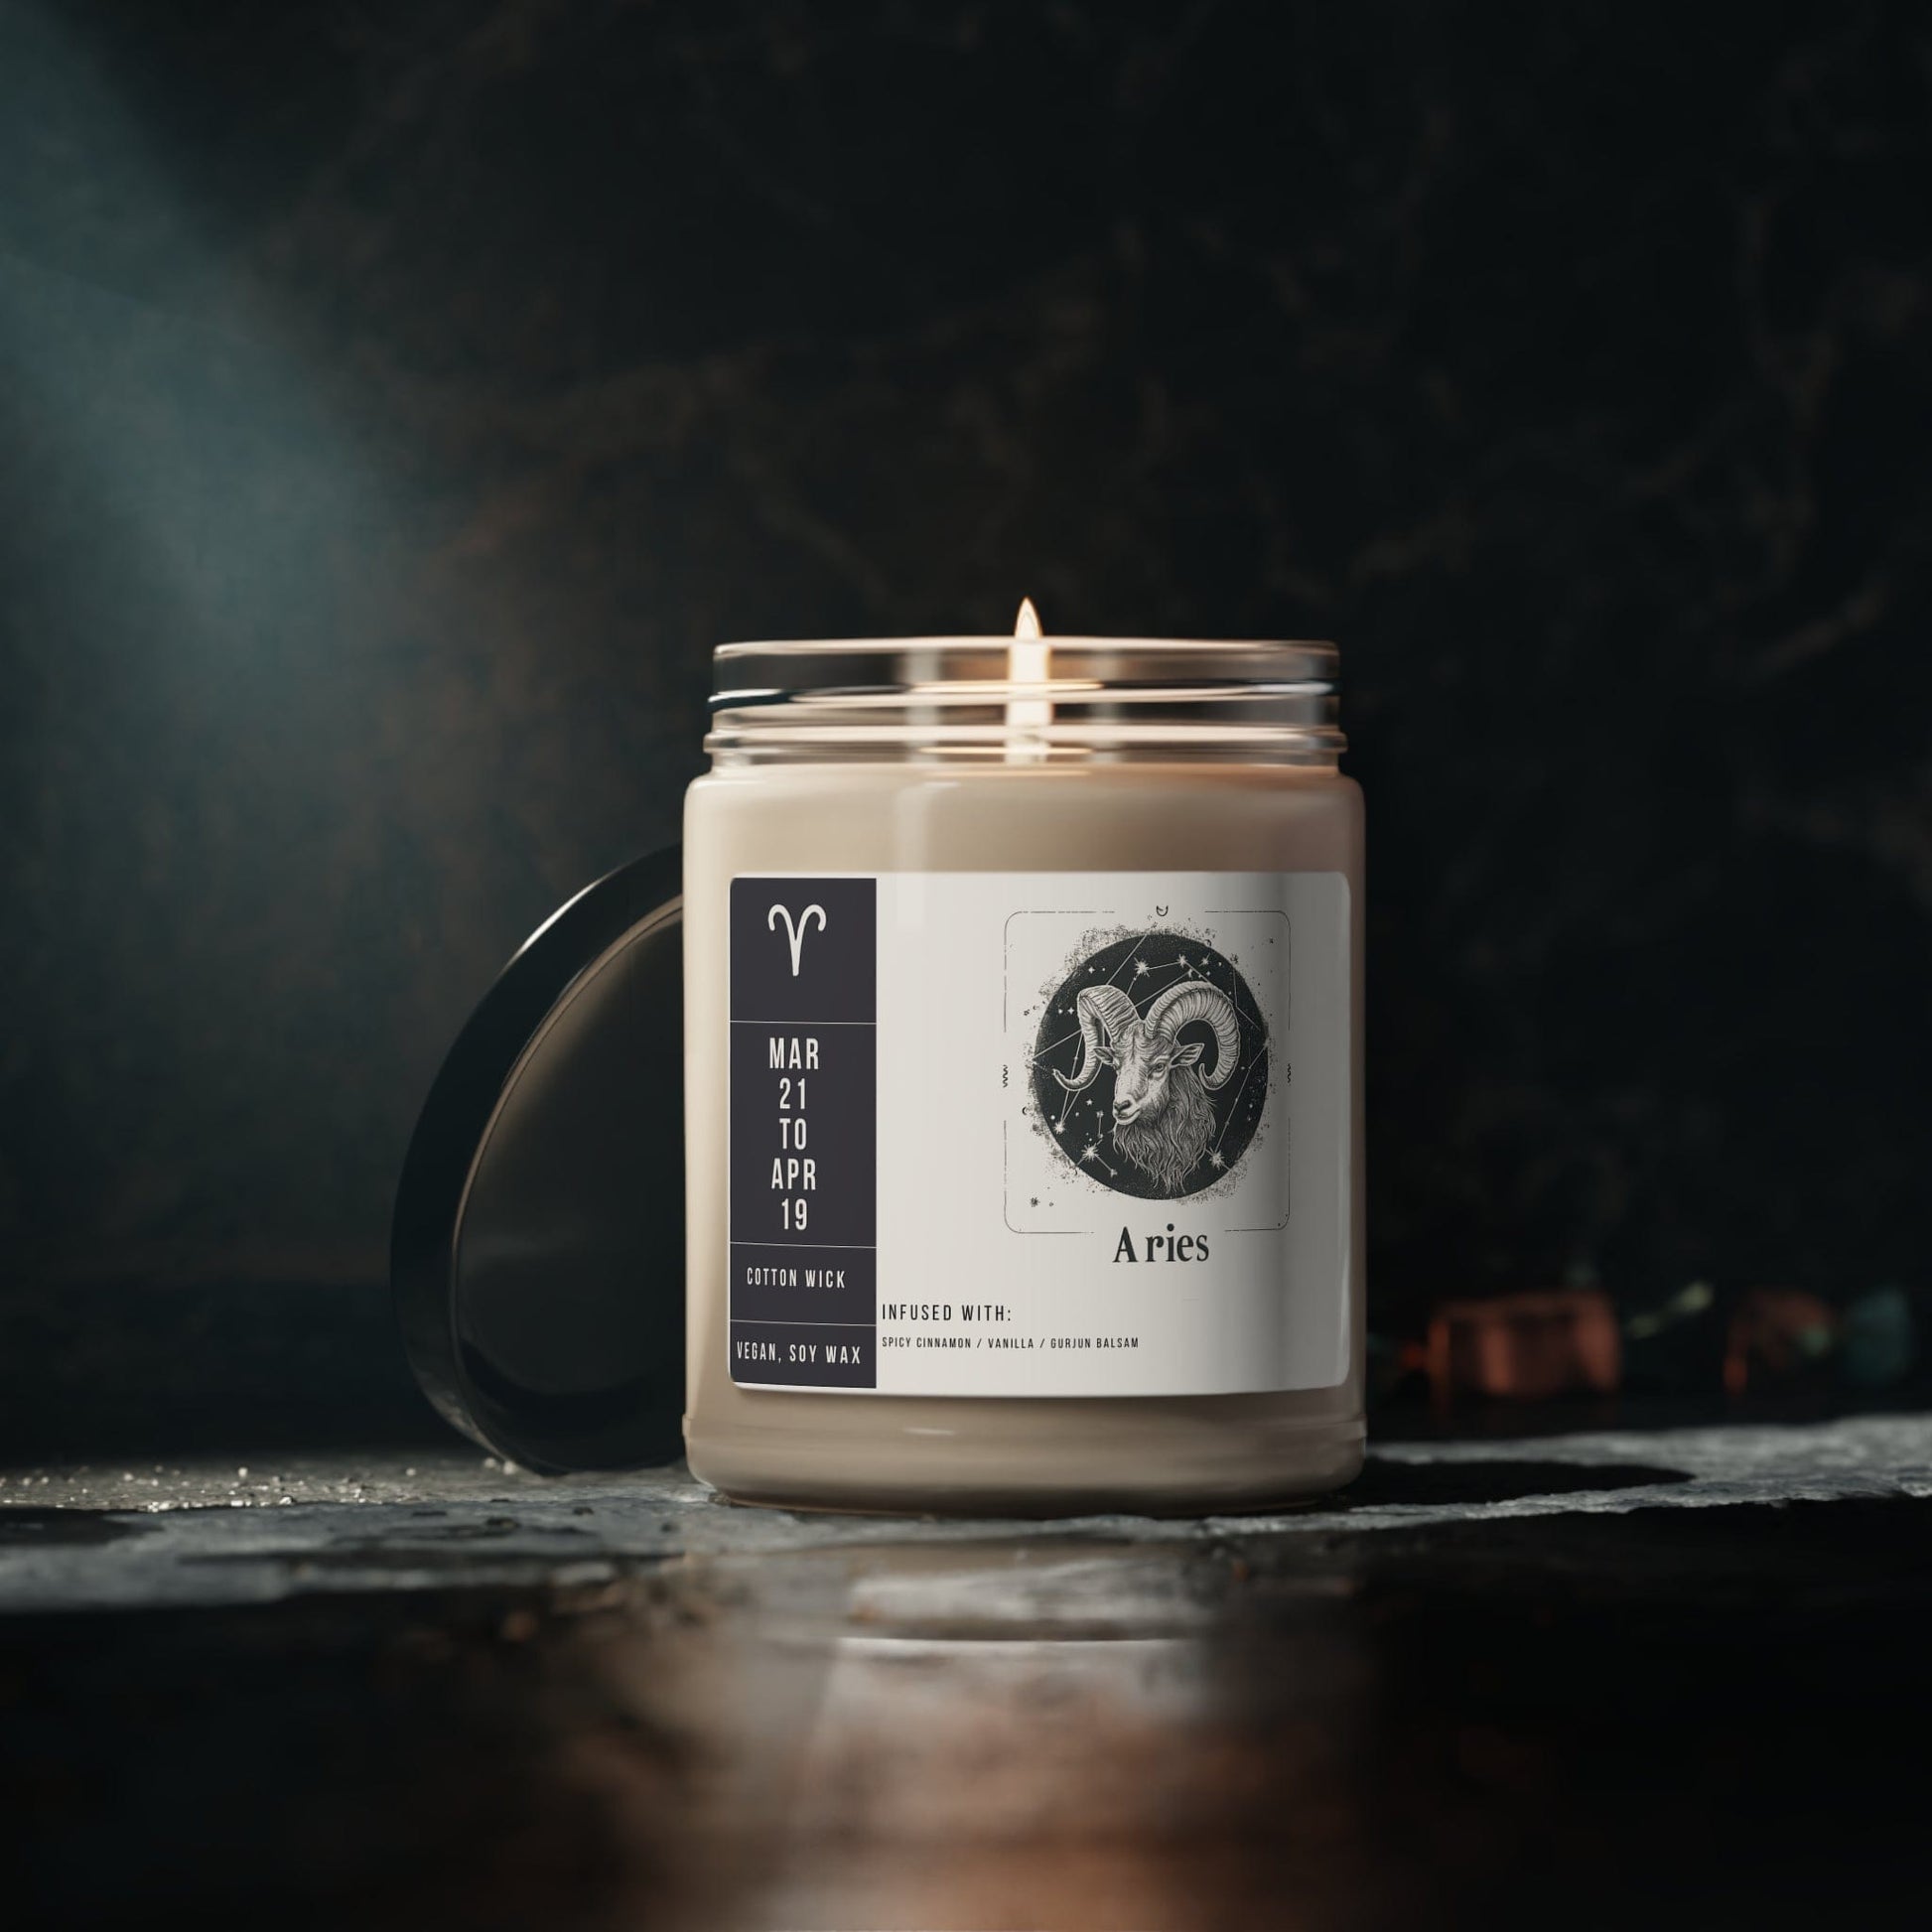 Home Decor Aries Zodiac Scented Soy Candle Collection – Blaze of the Ram